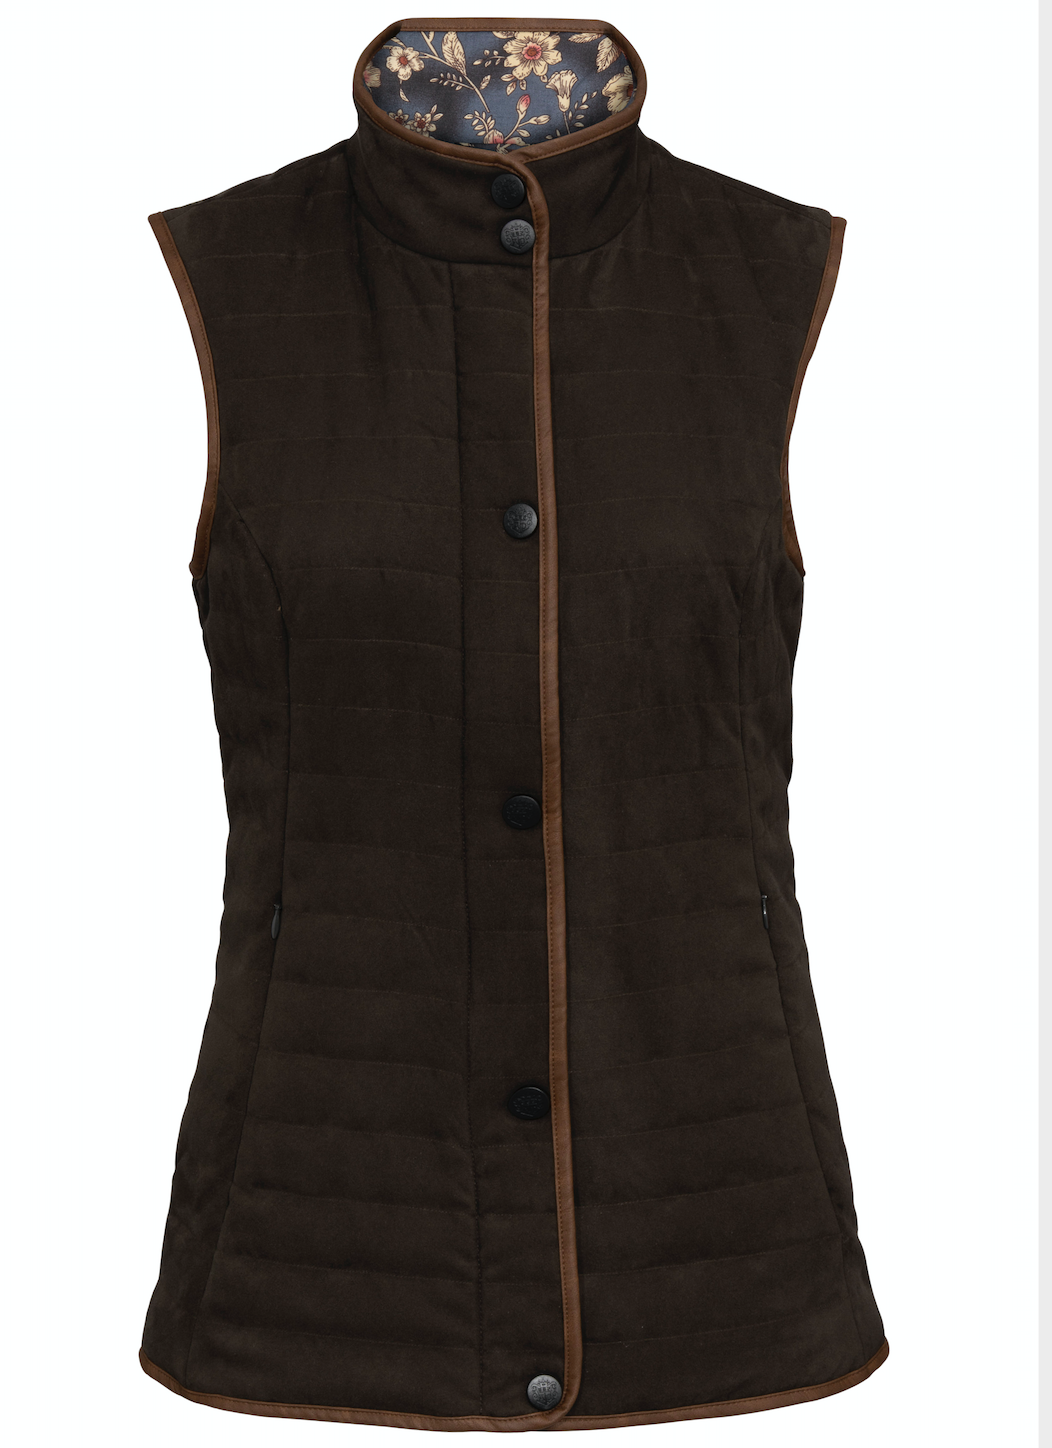 Alan Paine Felwell Quilted Waistcoat in Olive (Ladies)